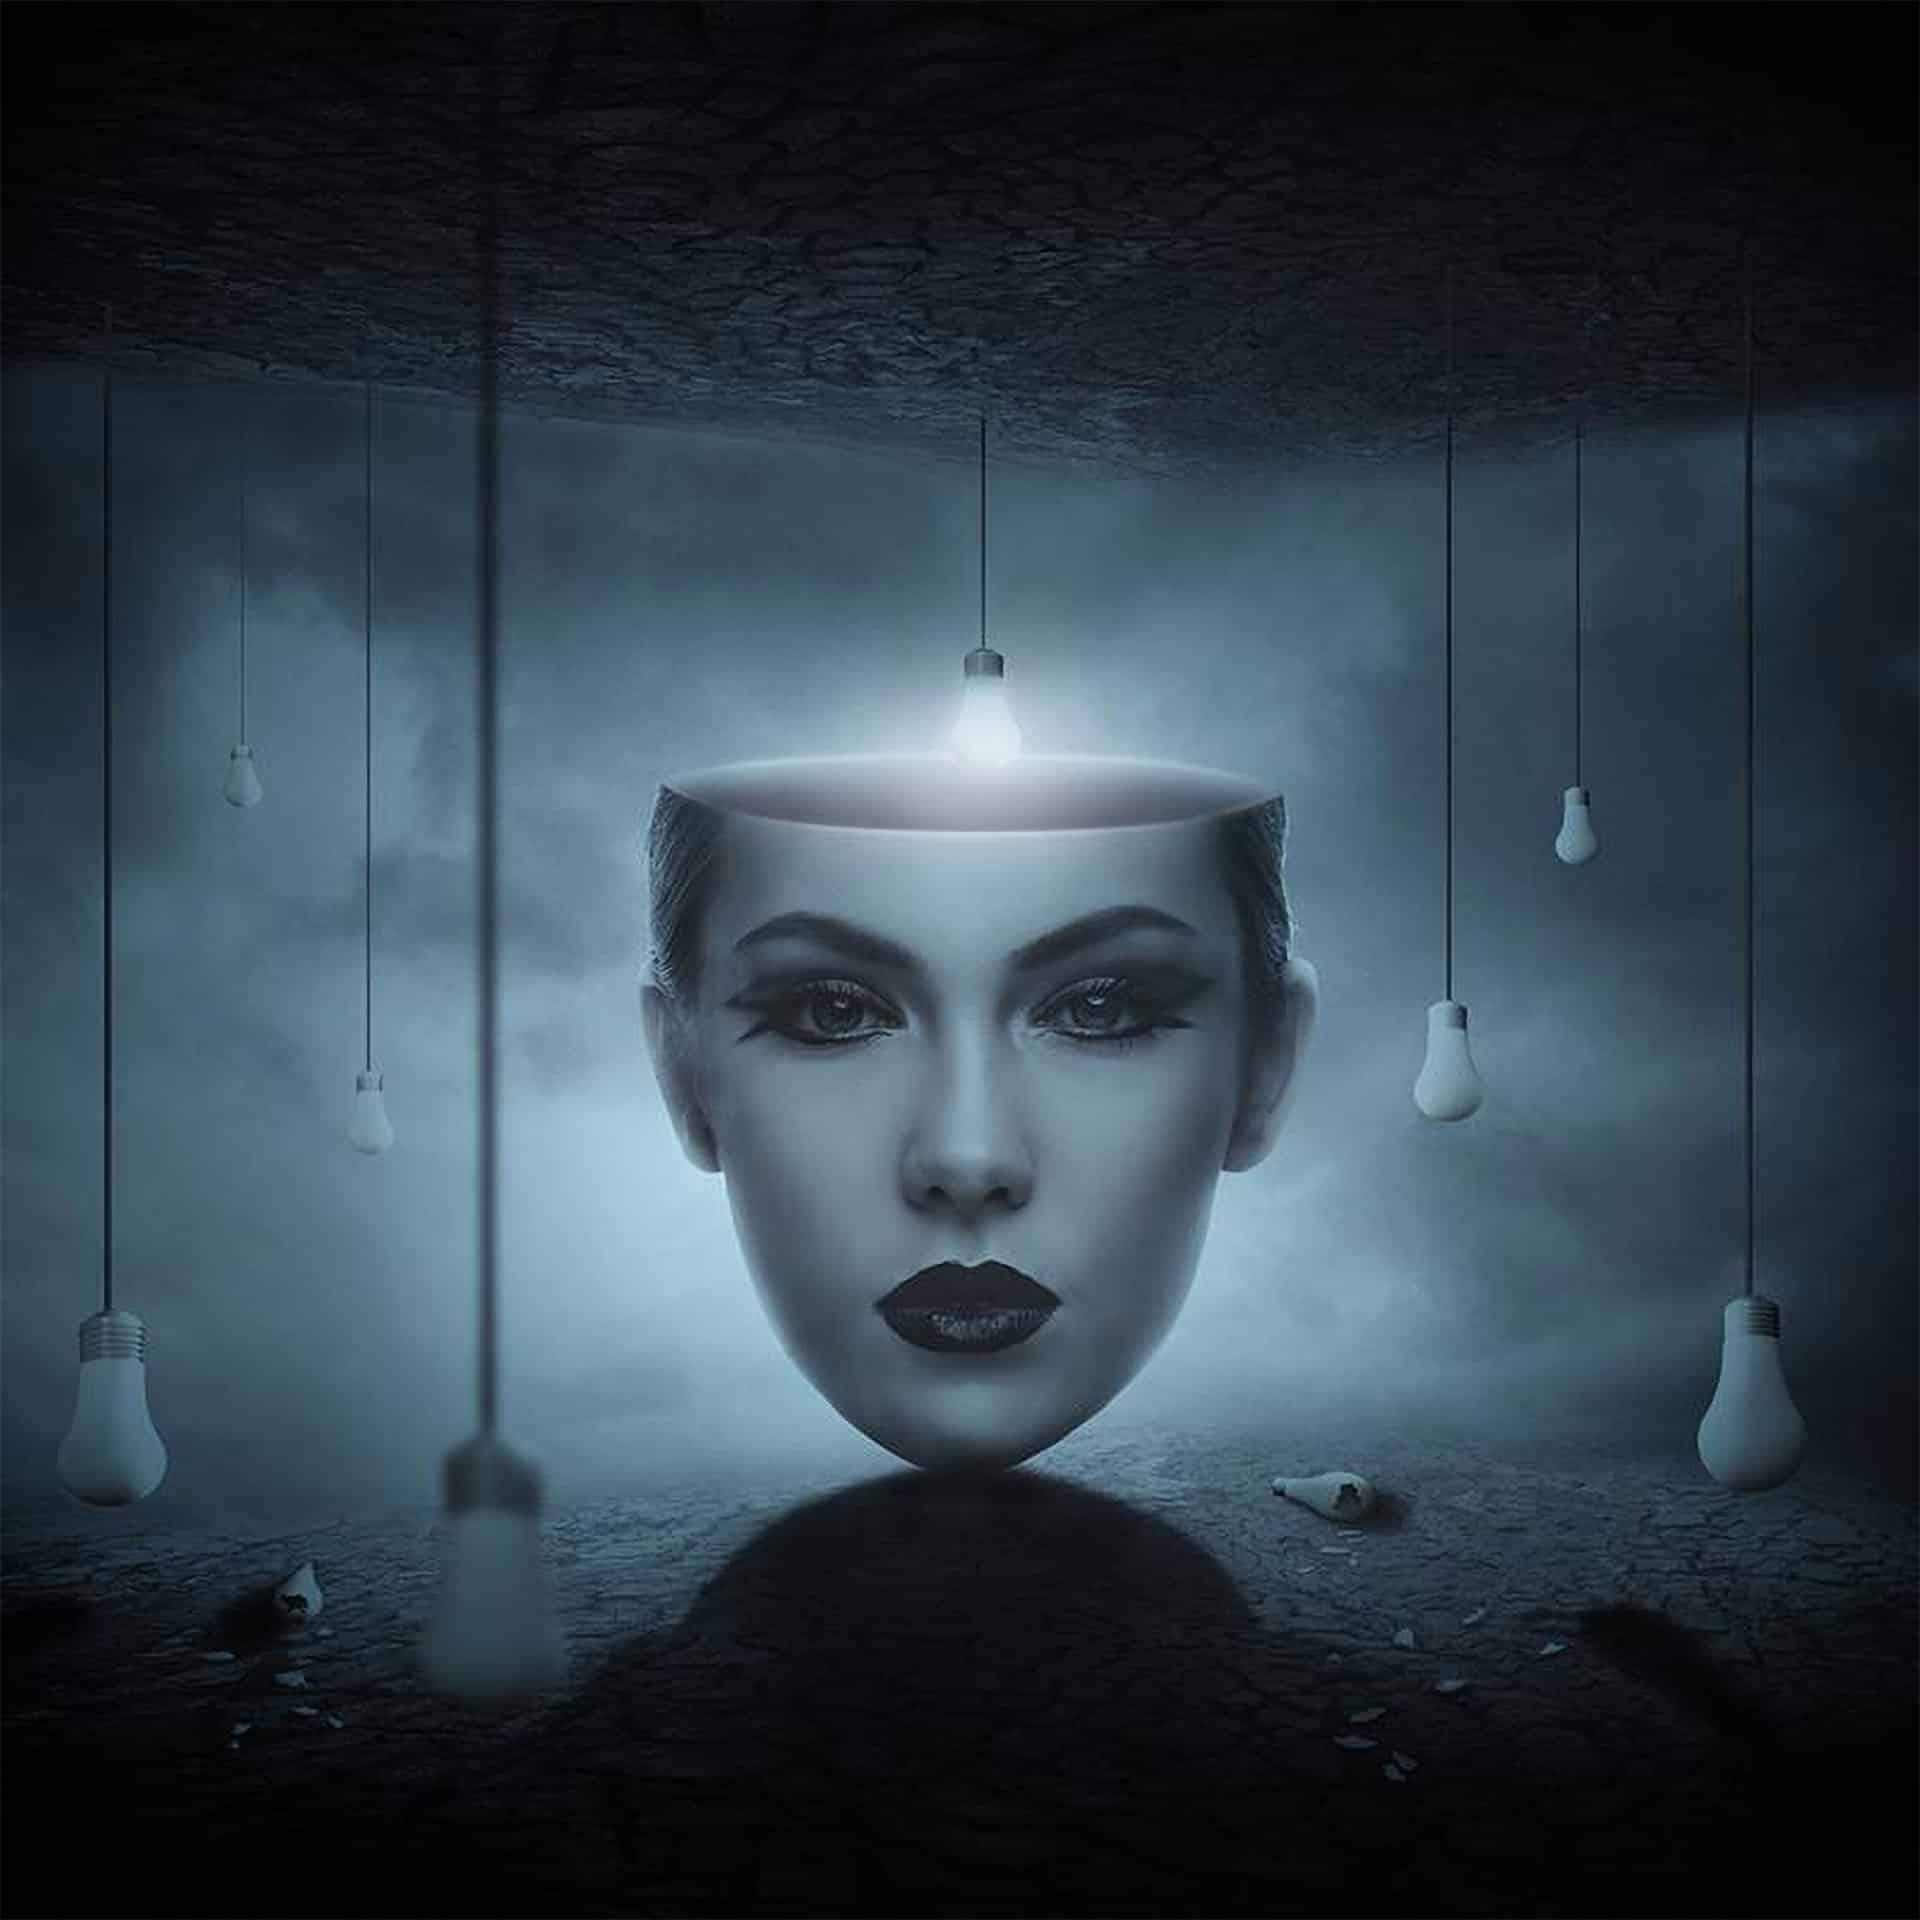 How to Create a Surreal, Conceptual Head Photo Manipulation with Photoshop